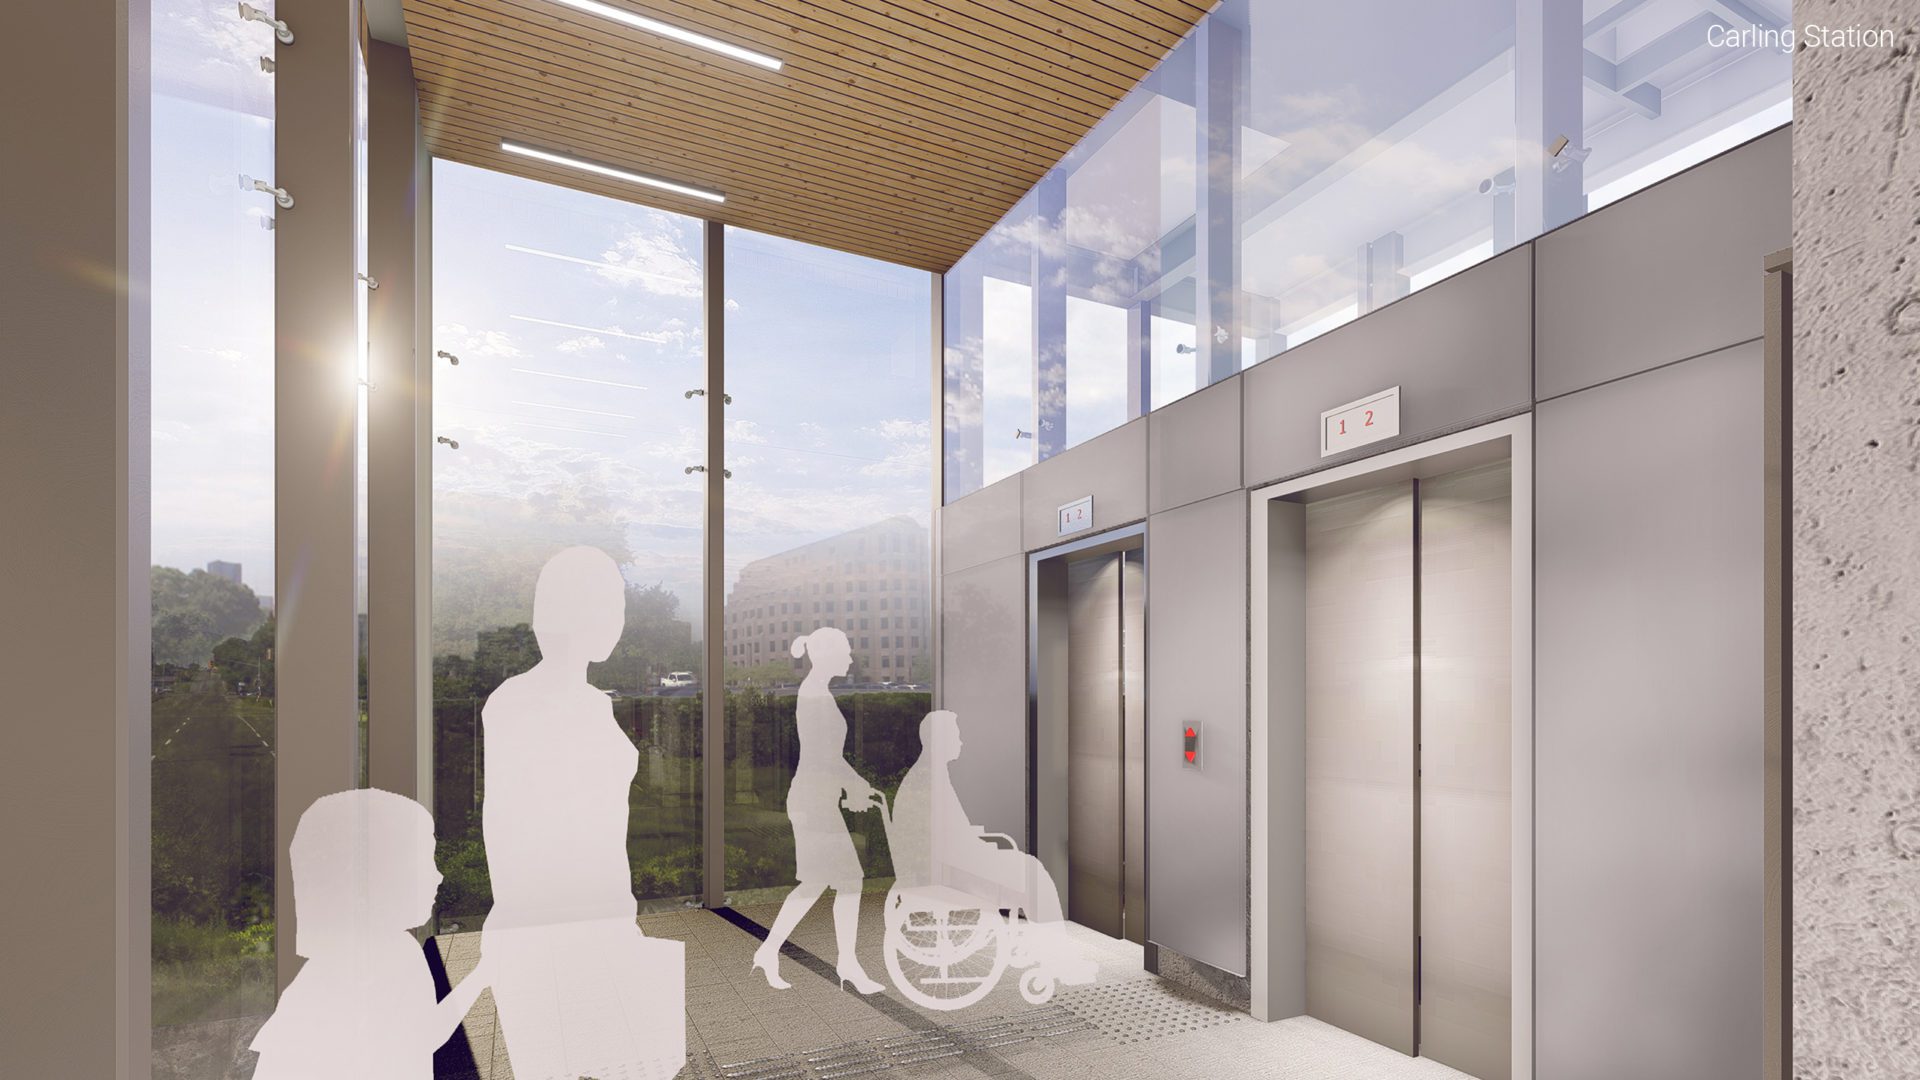 interior image of train station. a woman stands by a man in wheelchair waiting for elevator